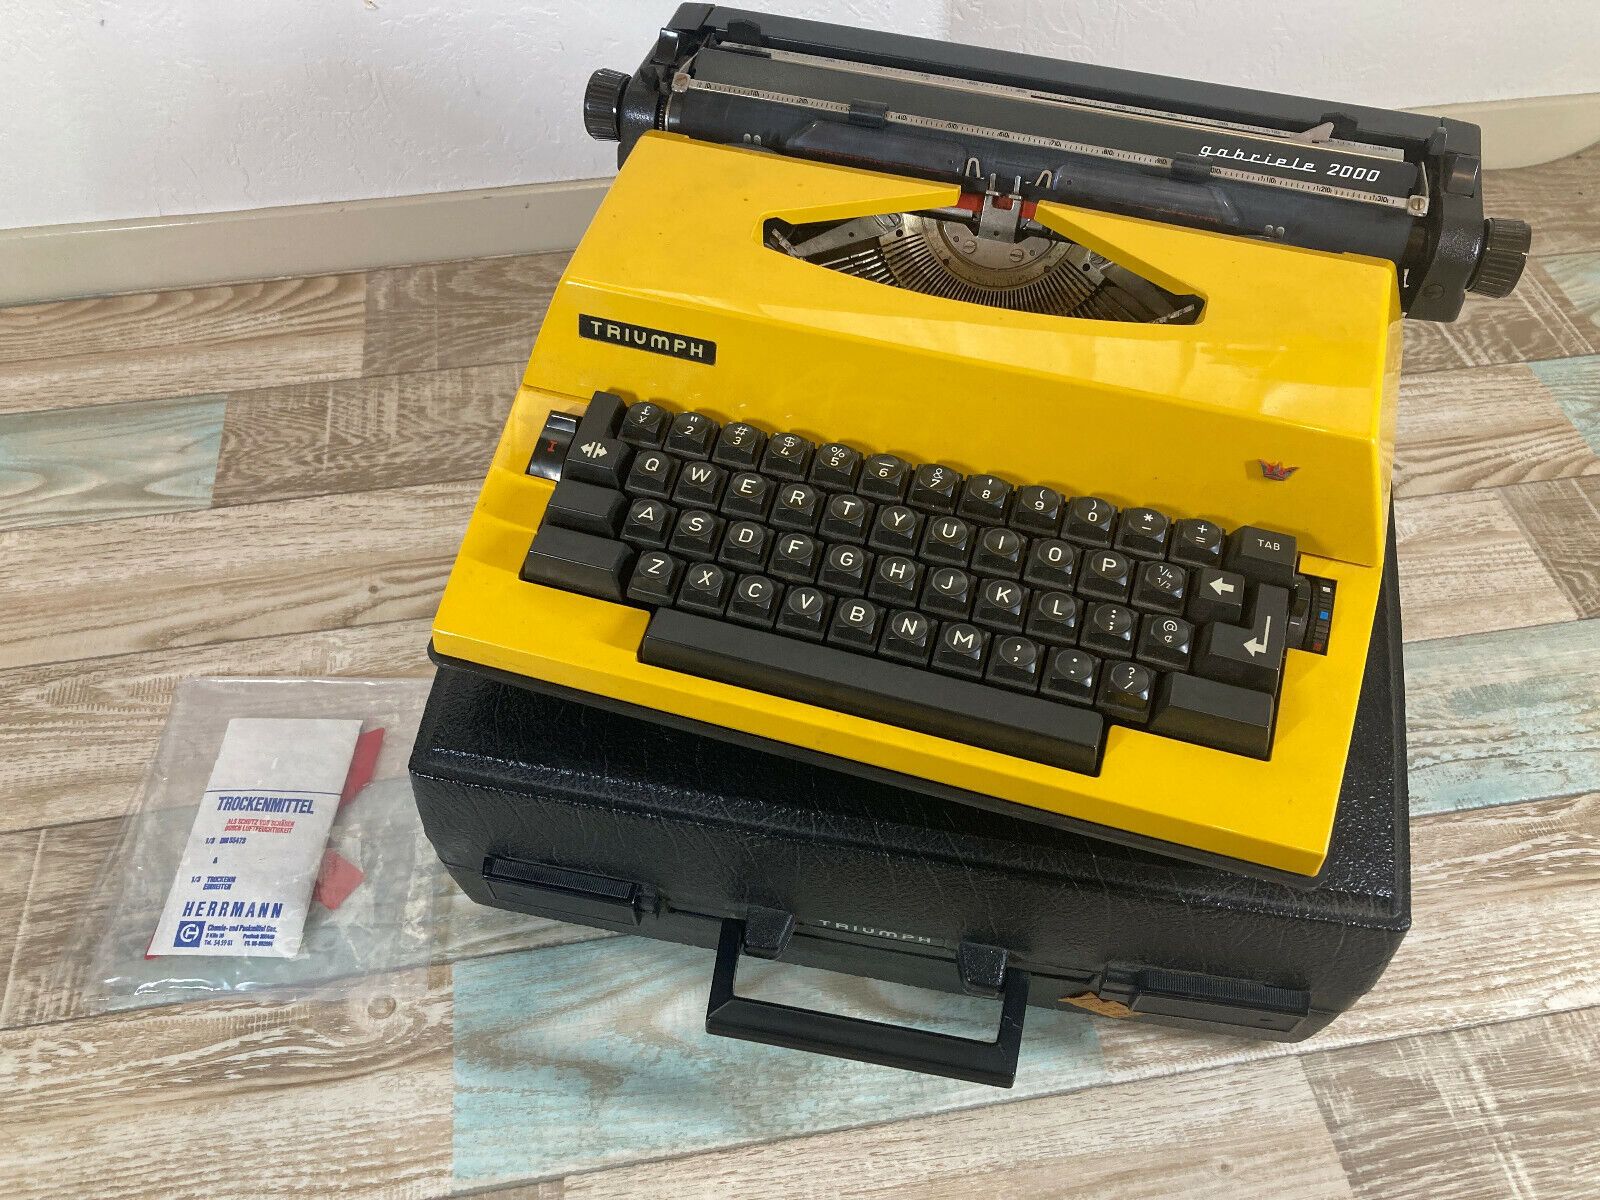 Rare Triumph Typewriter Yellow gabriele 2000 set w / Case Tested AS-IS